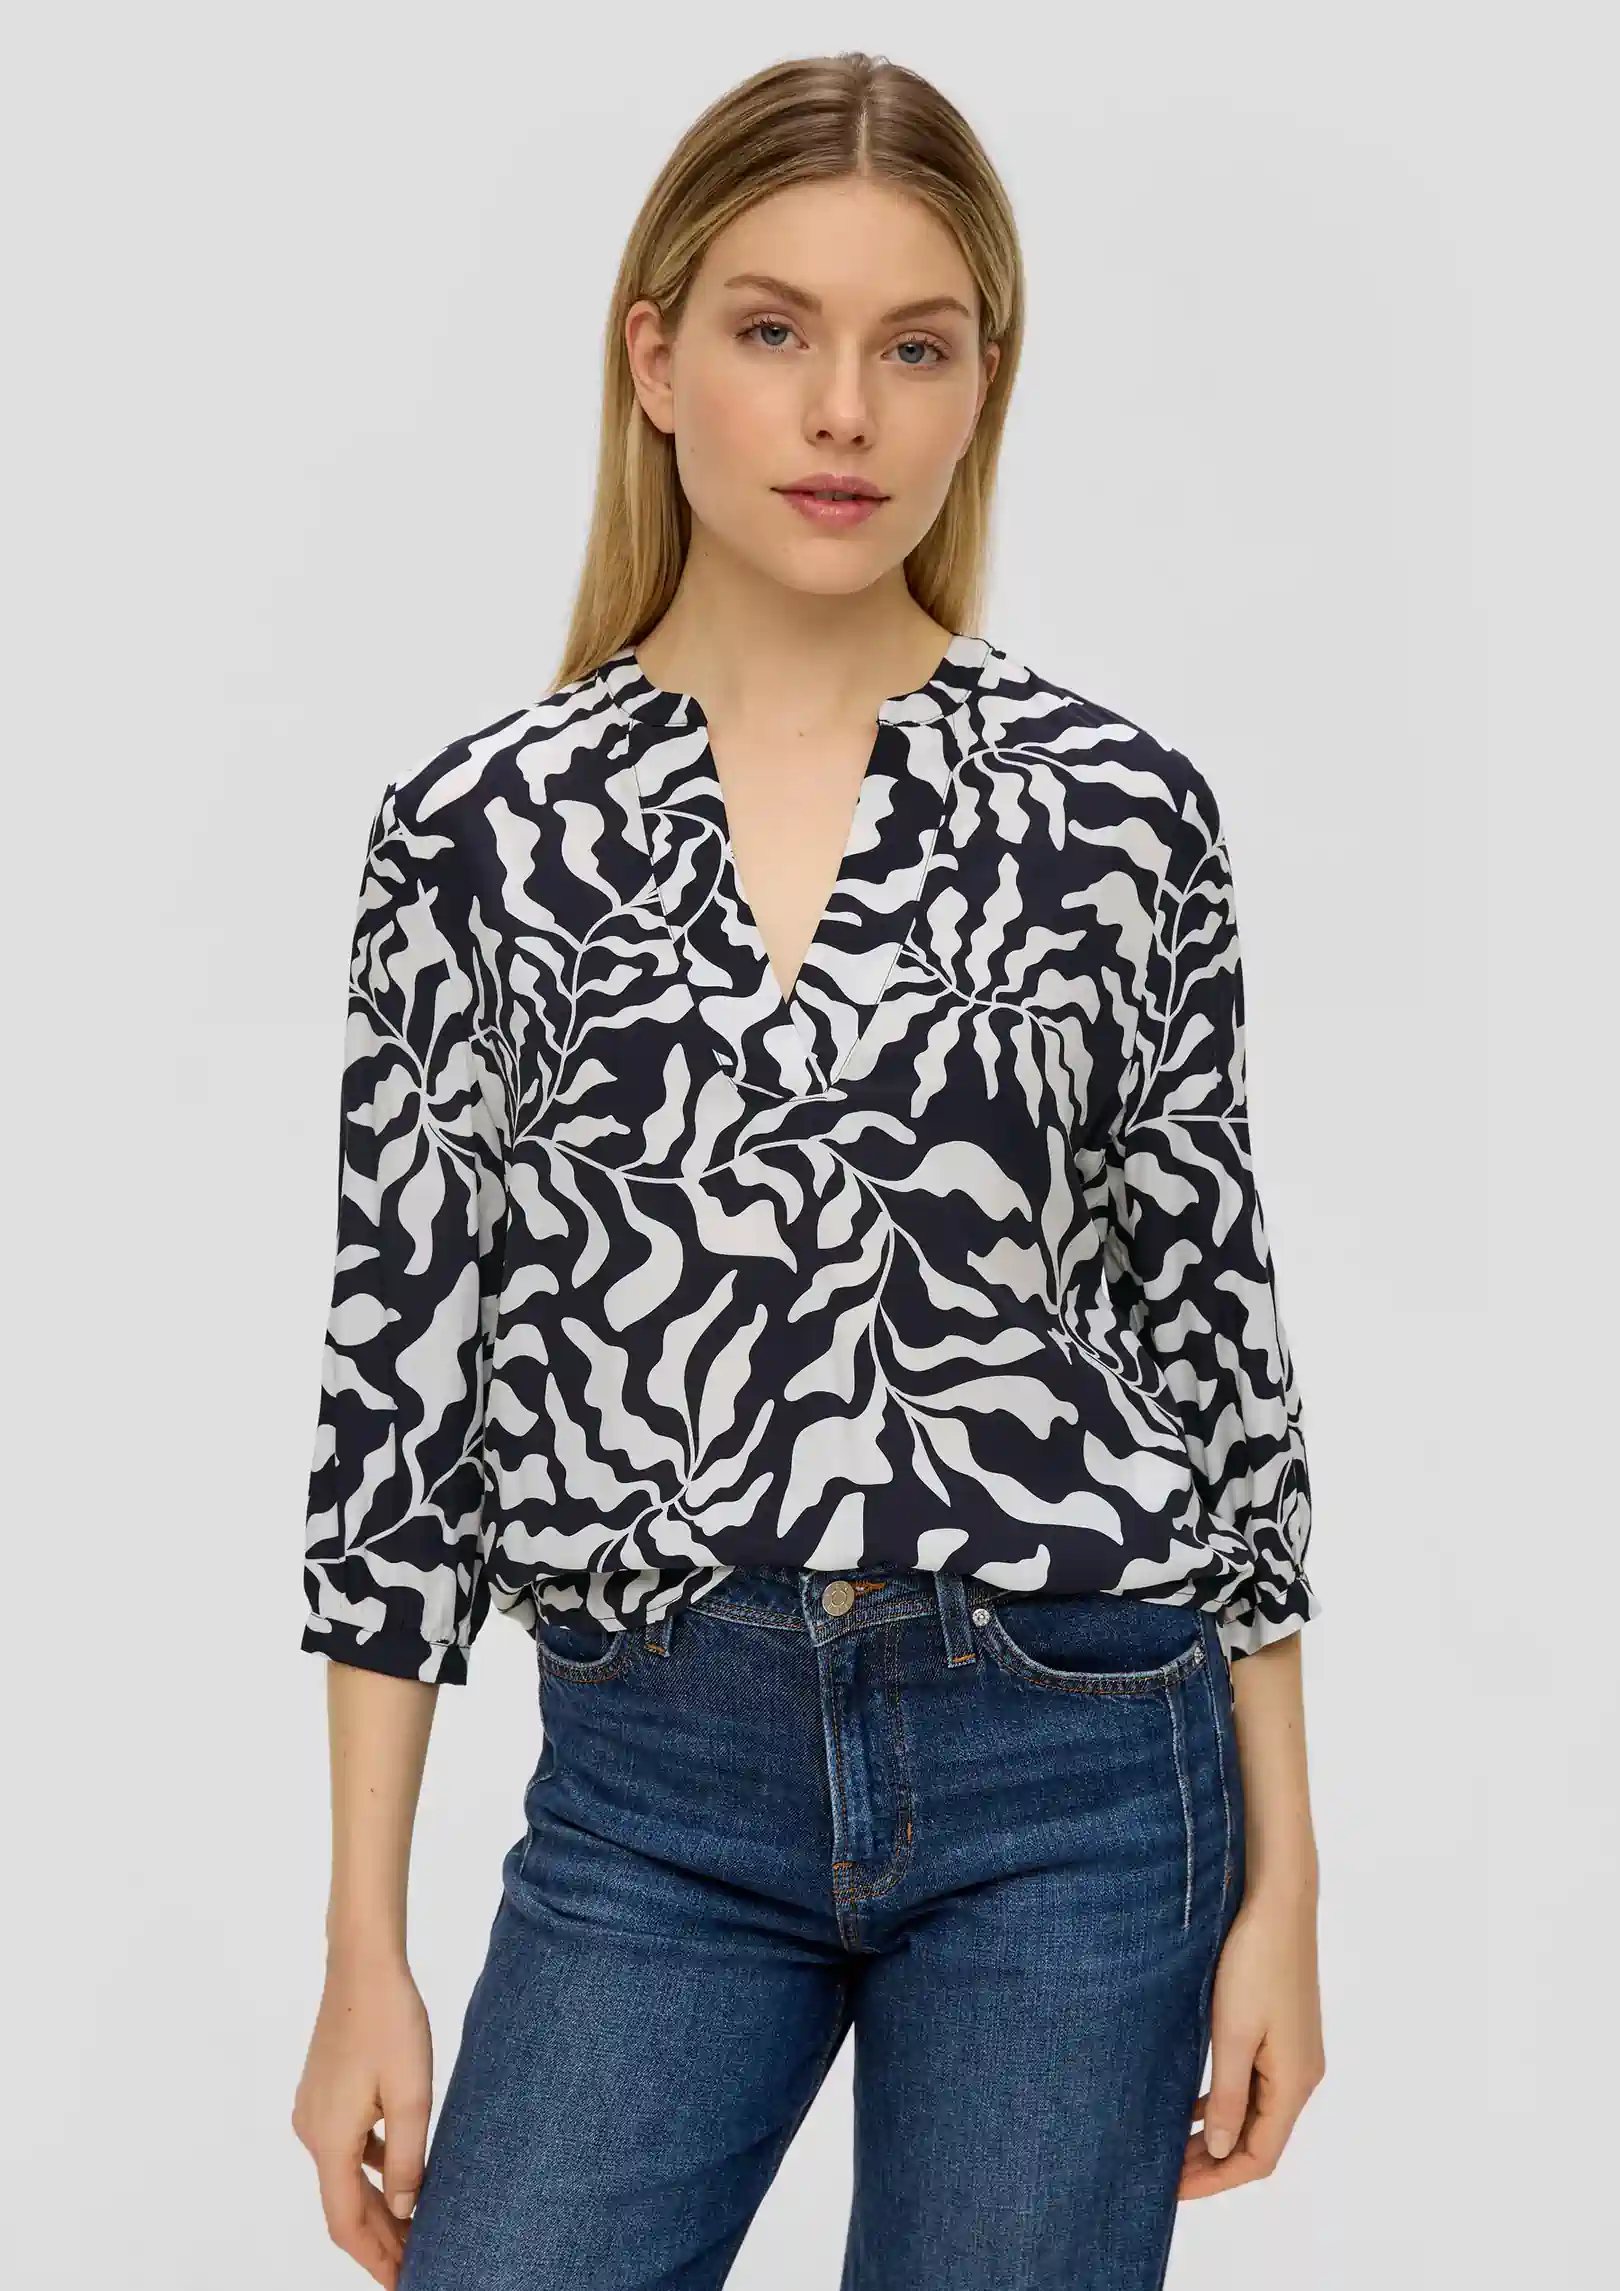 Woman Viscose Floral Printed Blouse Navy S'OLIVER.2142573 (9)